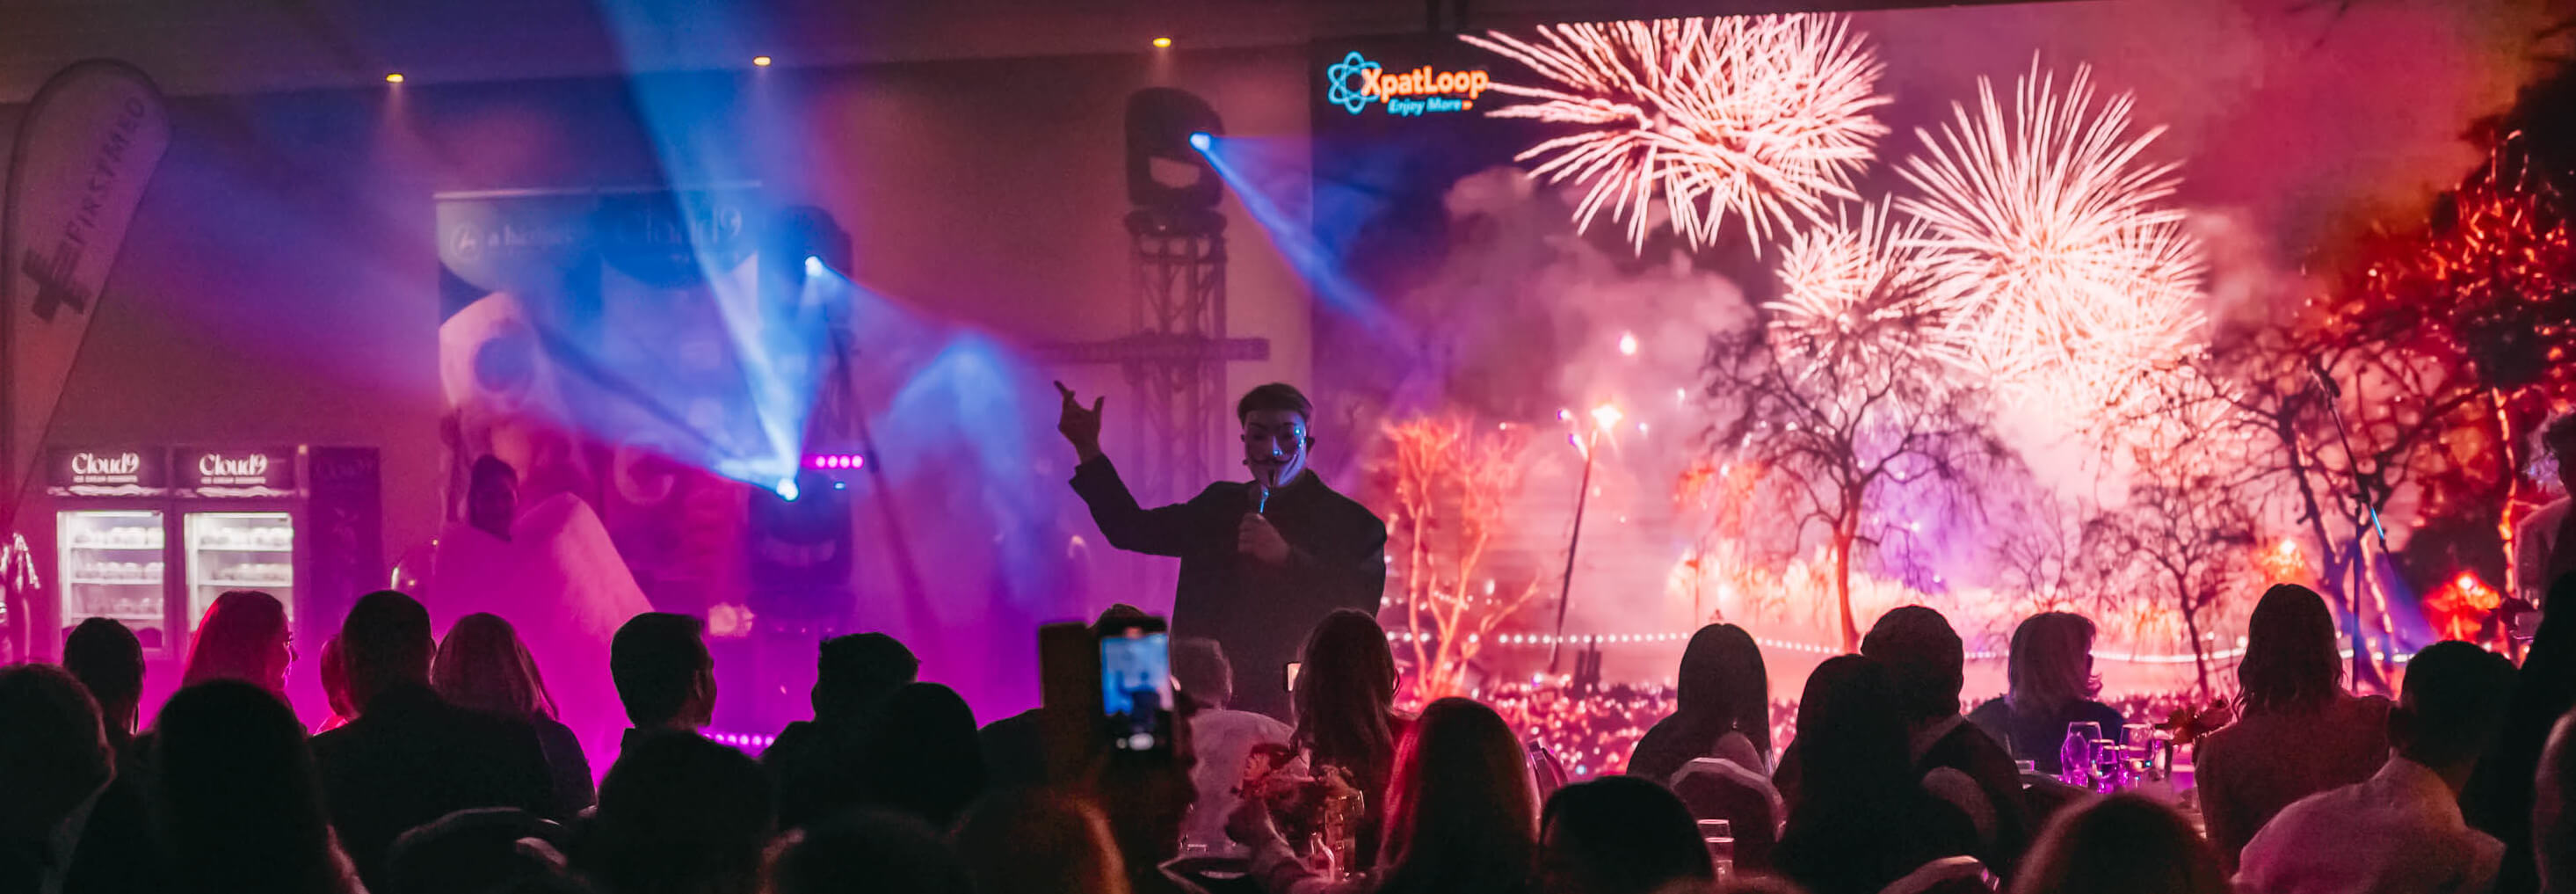 See What Happened: Xpat Charity Party - 007 Bonfire Night Bash @ Budapest Marriott